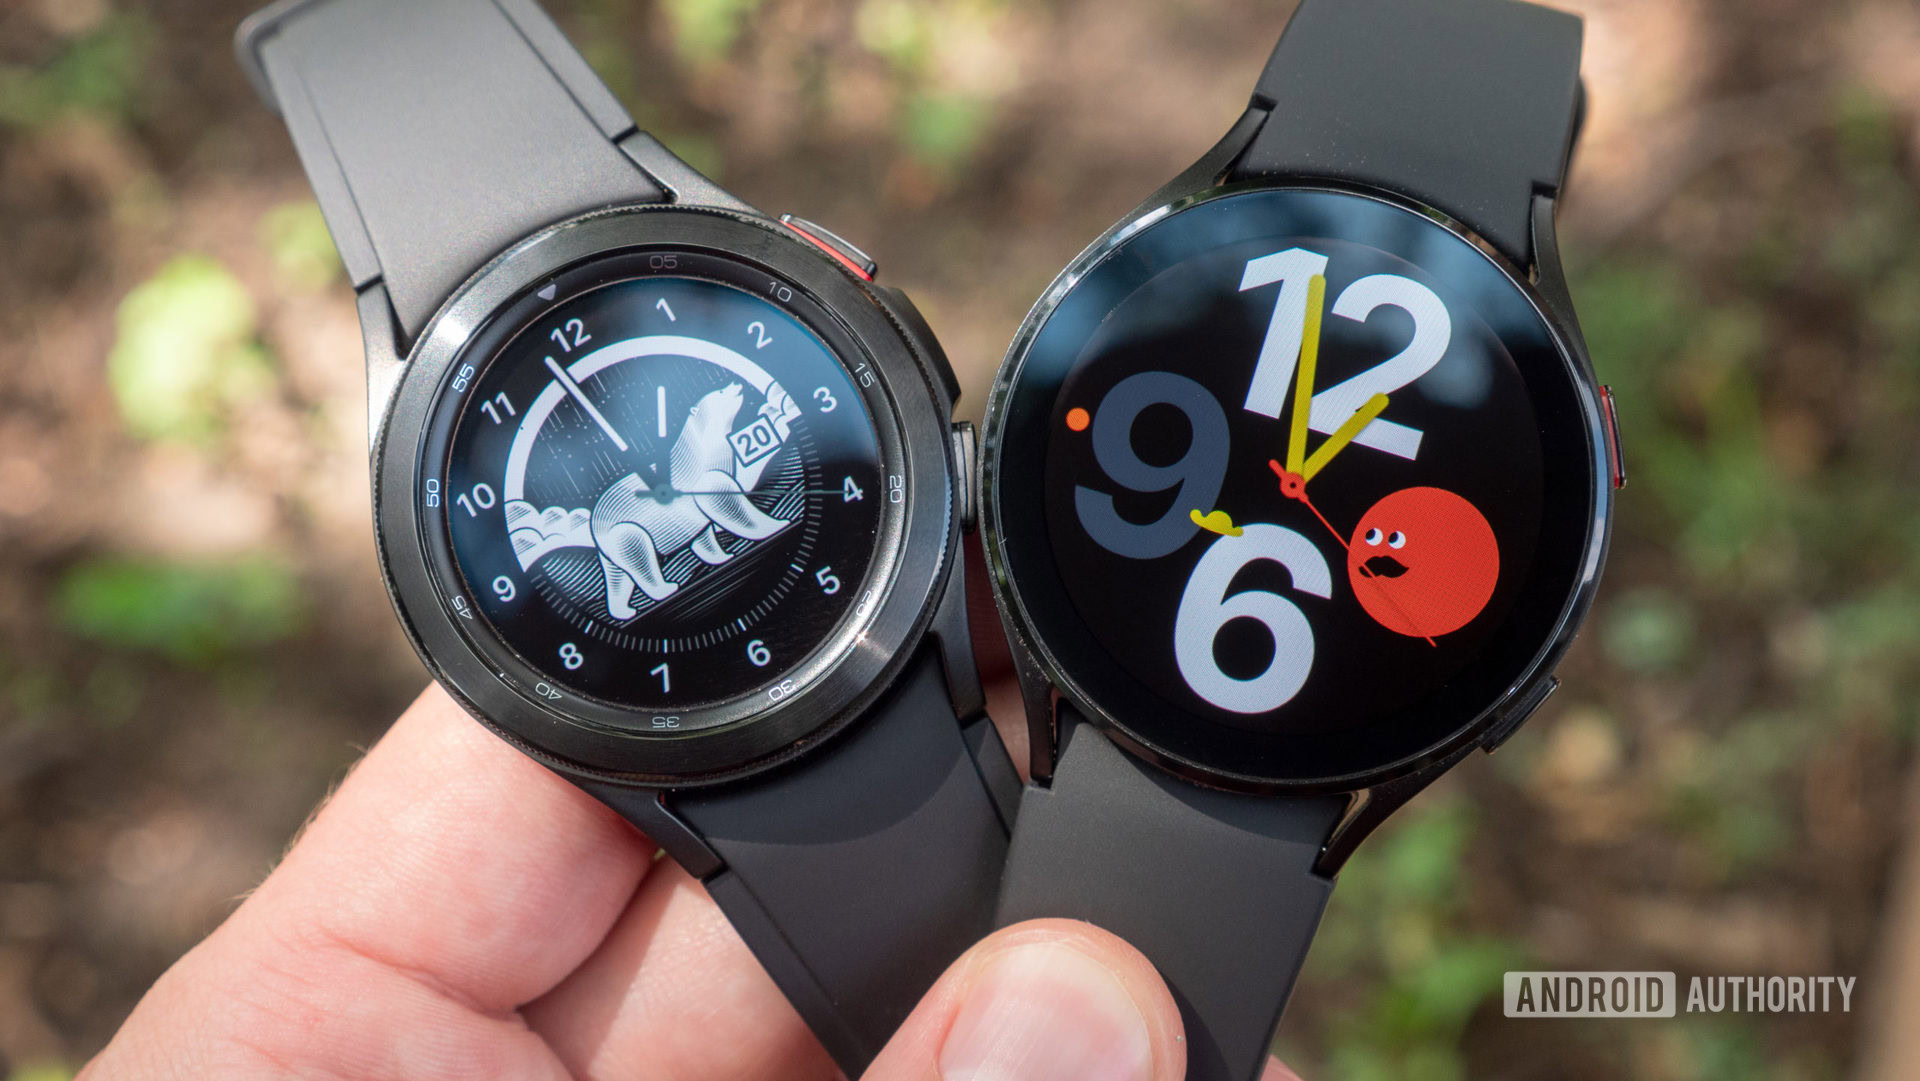 A users holds both a Samsung Galaxy Watch 4 and a Samsung Galaxy Watch 4 Classic in hand.